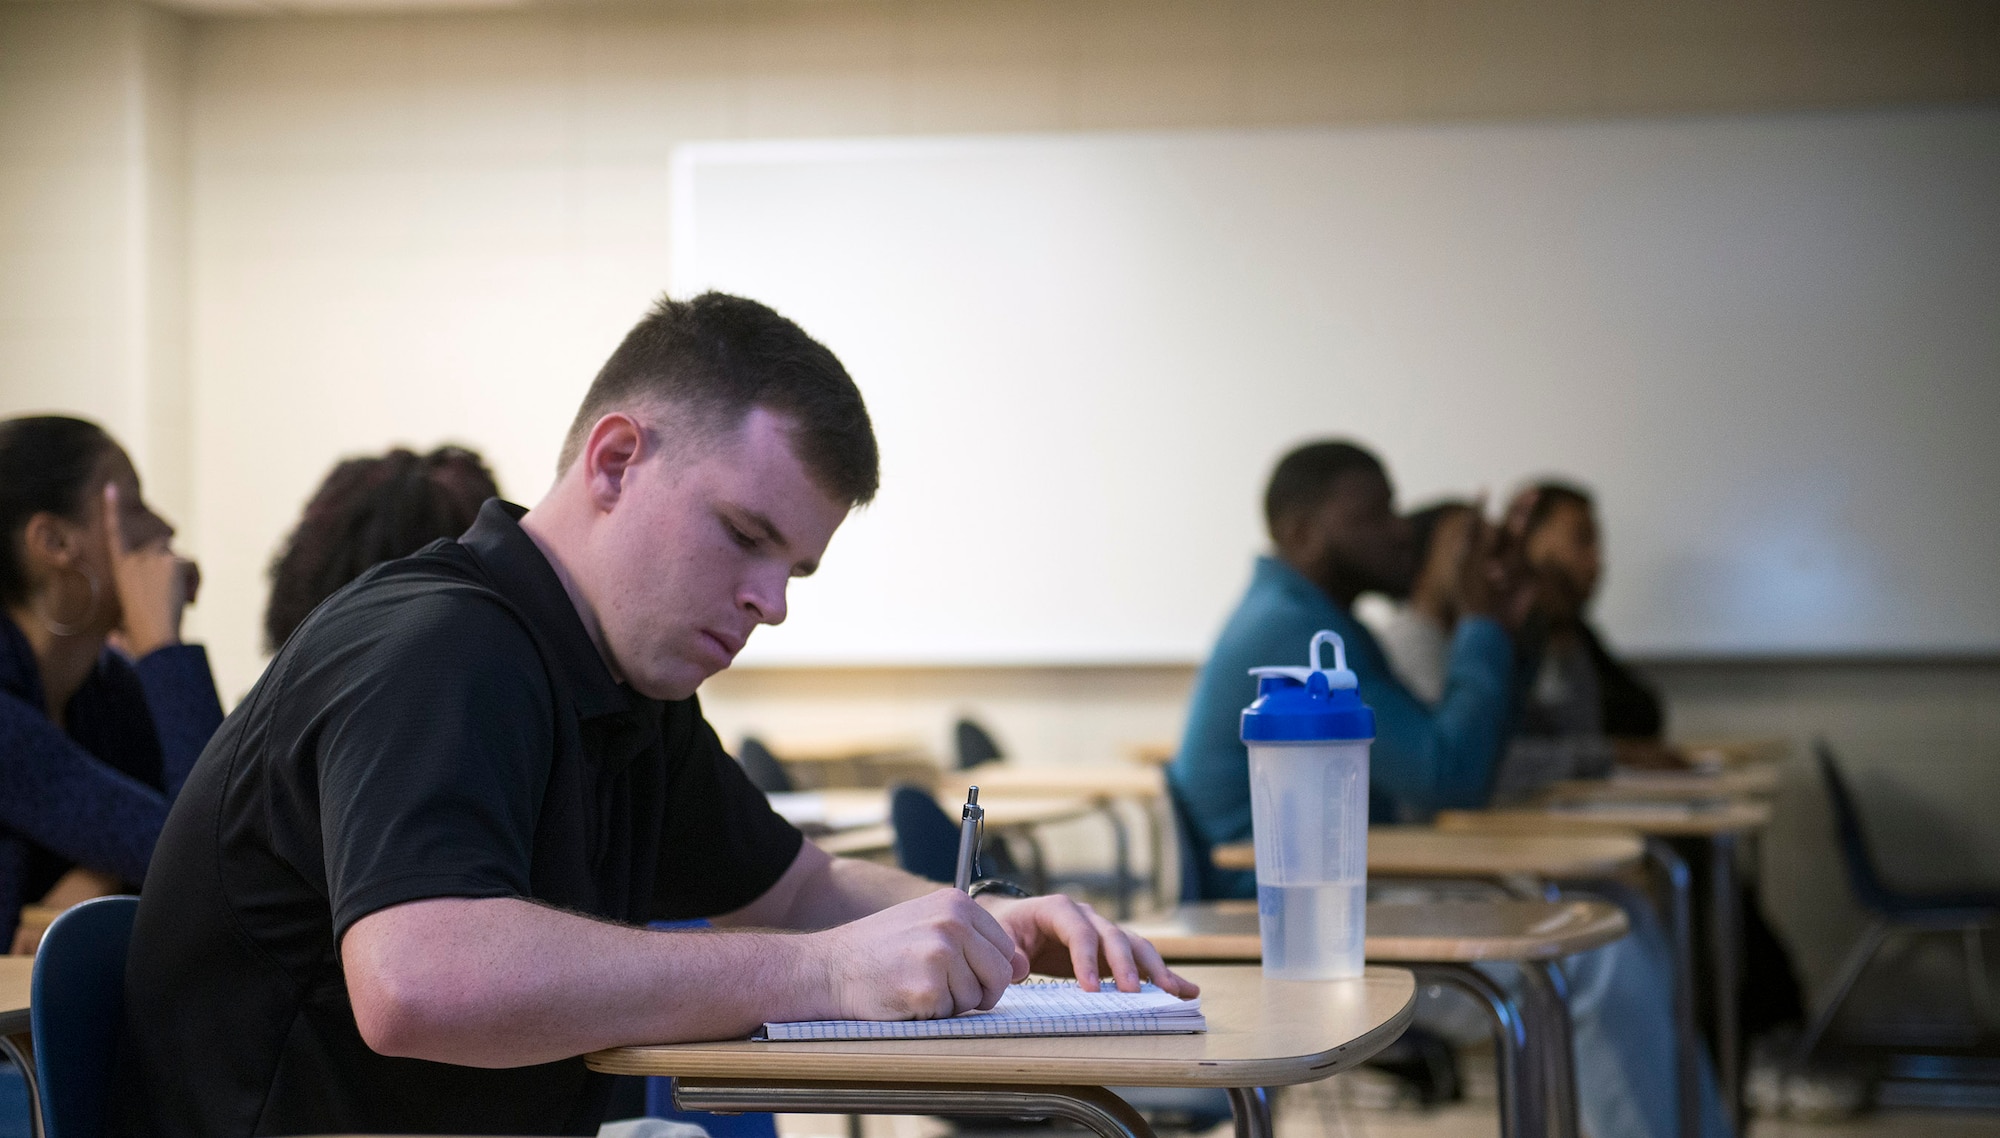 Cadet Col. Bradley Joyal, Air Force ROTC Detachment 172 cadet wing commander, takes notes during class at a local college, Nov. 16, 2015, in Valdosta, Ga. Joyal completed his aspirations of commissioning as a combat systems officer in the U.S. Air Force after earning a degree in criminal justice and graduating in May. (U.S. Air Force photo by Airman 1st Class Greg Nash/Released)